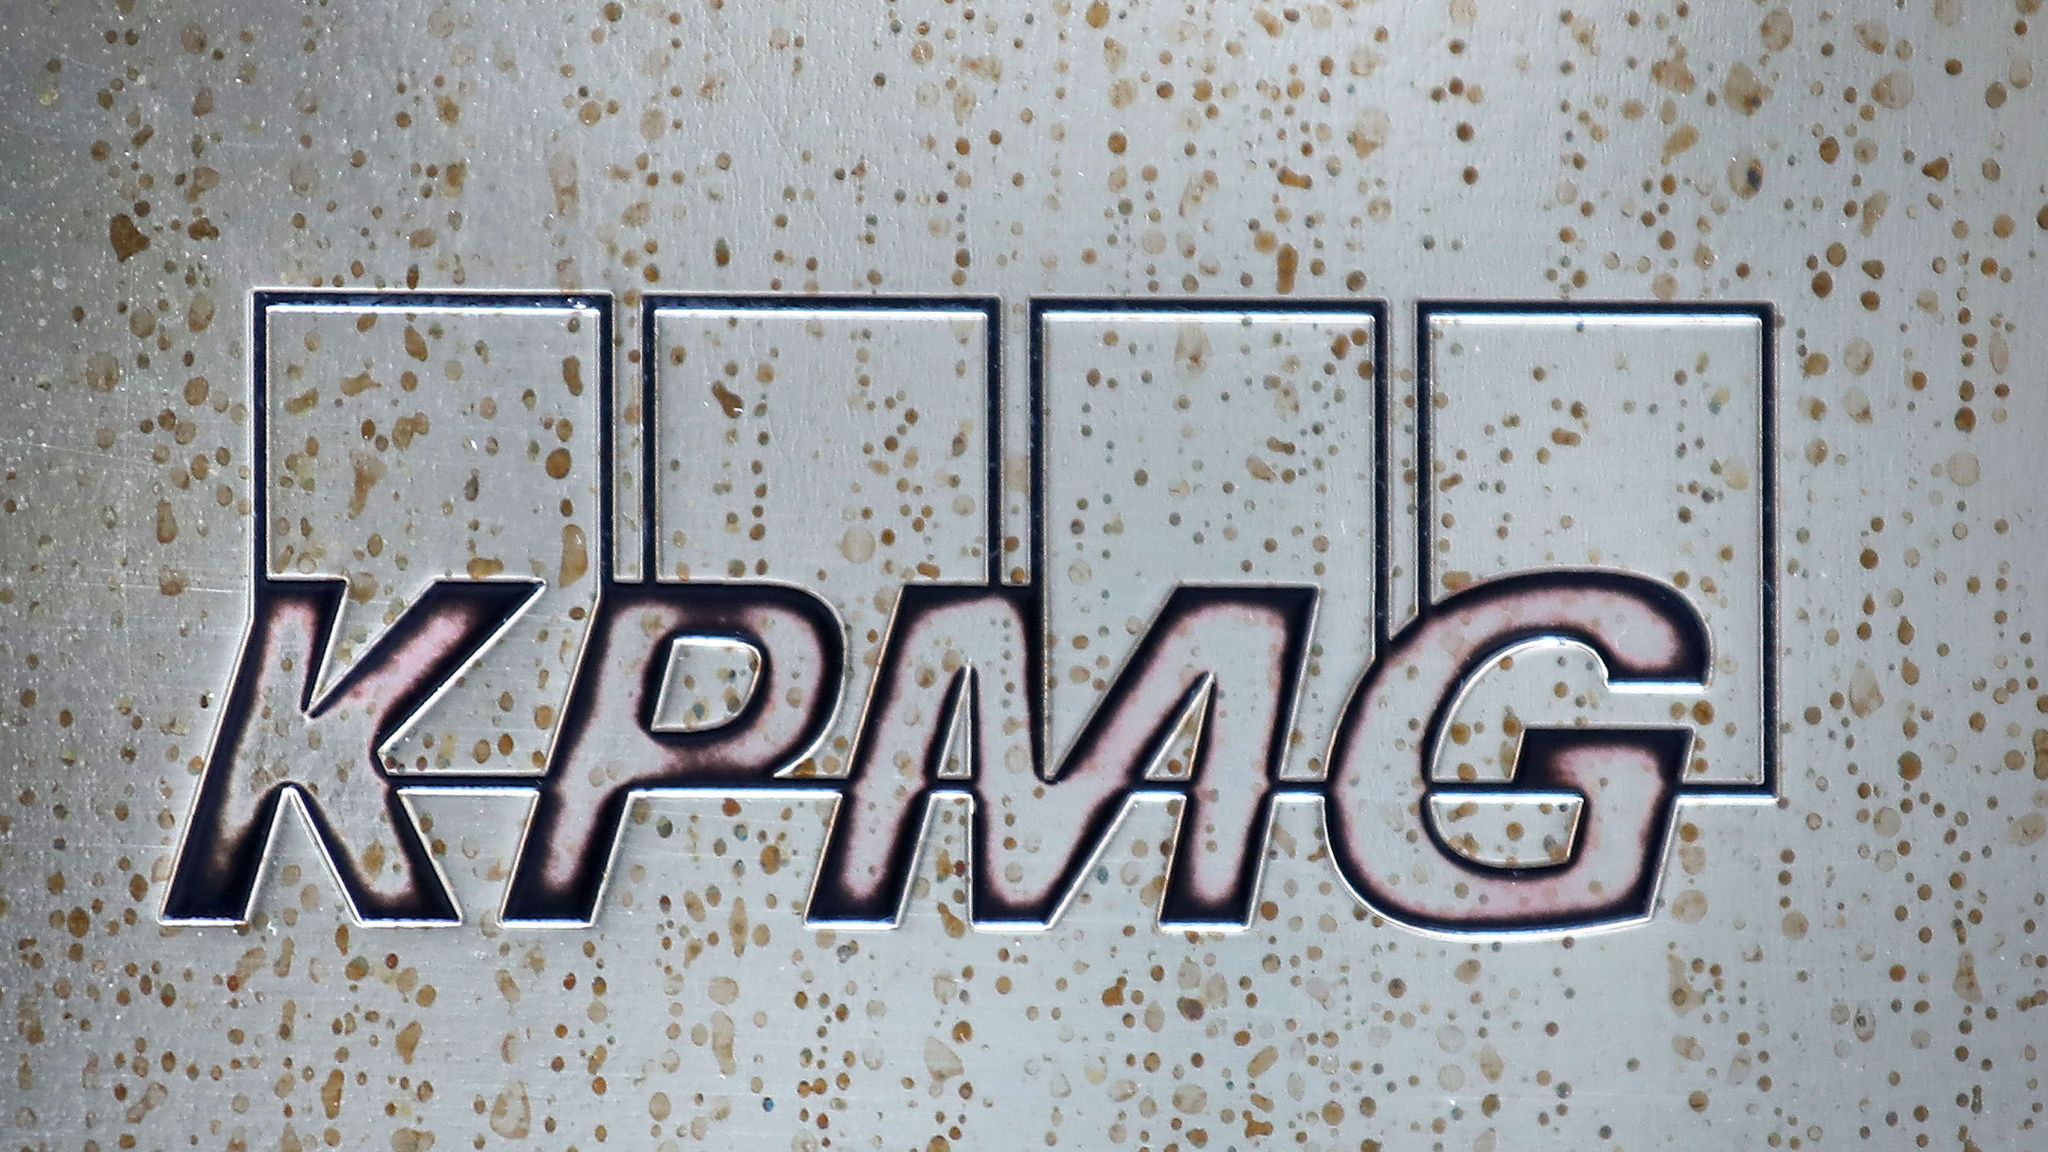 KPMG pays £10m in fines but auditors owe the public more